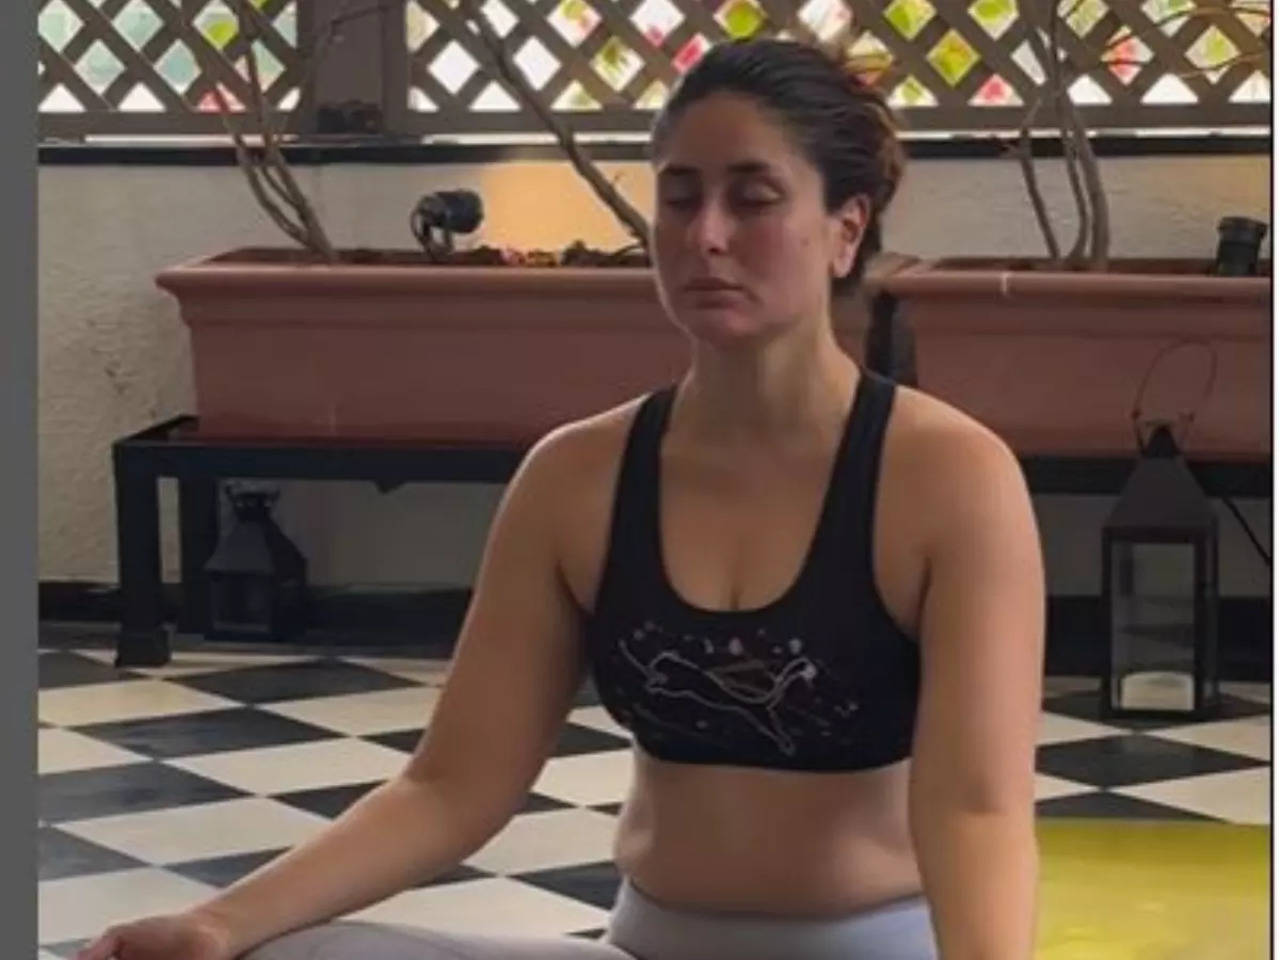 10 Chal Ki Xxx Video - Kareena Kapoor Khan shares her workout video, says she getting ready for  'The Crew' with Tabu and Kriti Sanon | Hindi Movie News - Times of India